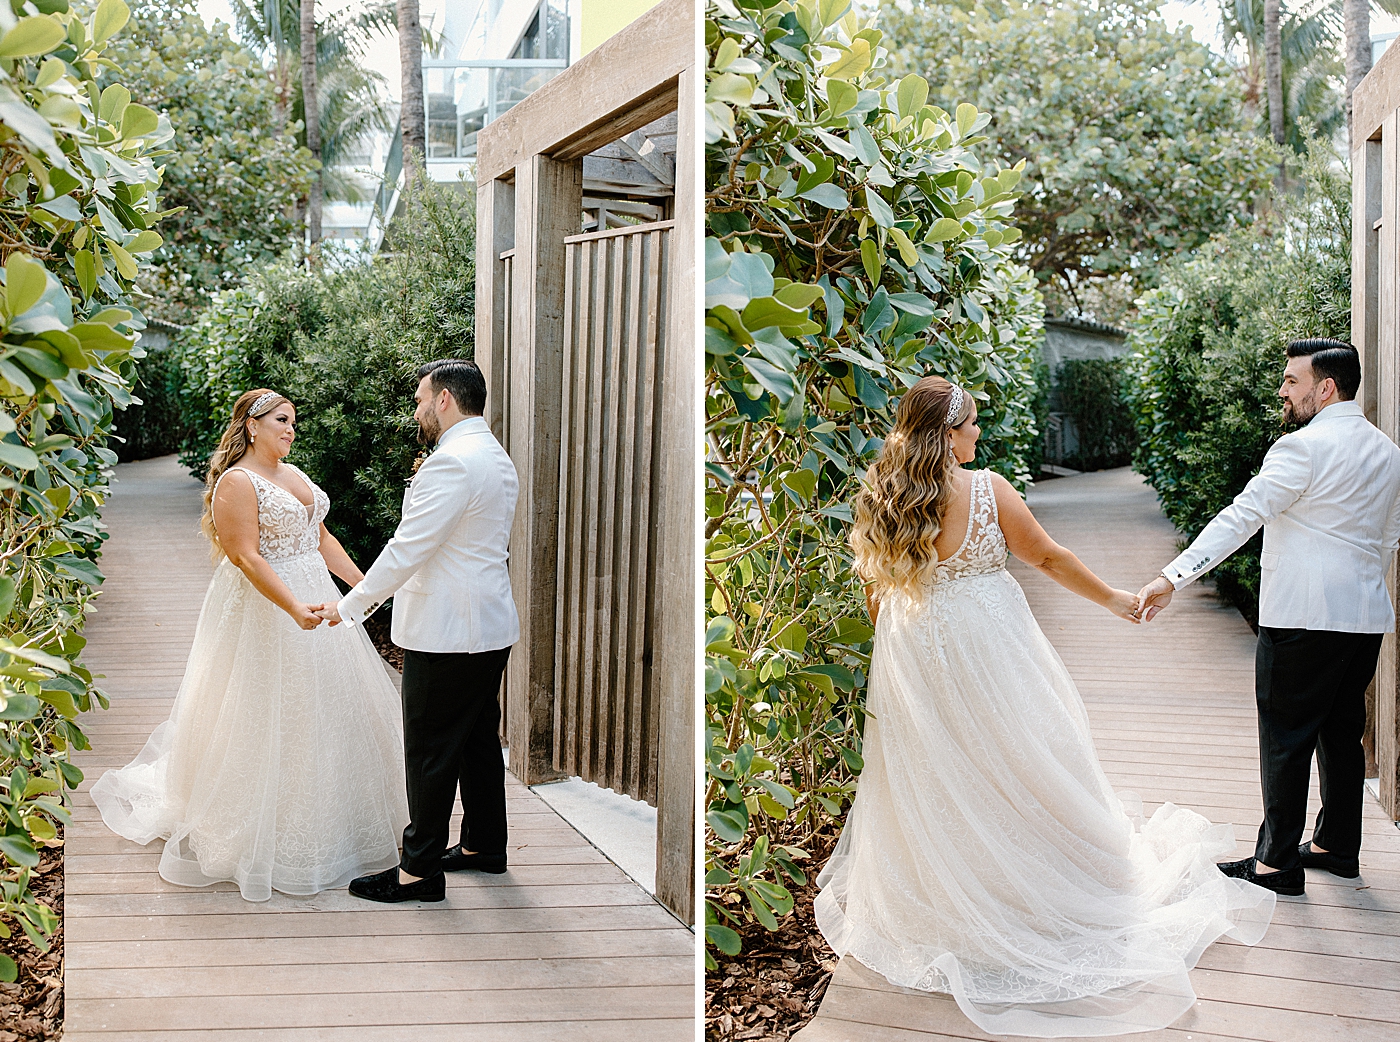 First look reaction with Bride and Groom holding hands Modern Elegant Wedding at The W South Beach captured by South Florida Wedding Photographer Erika Tuesta Photography